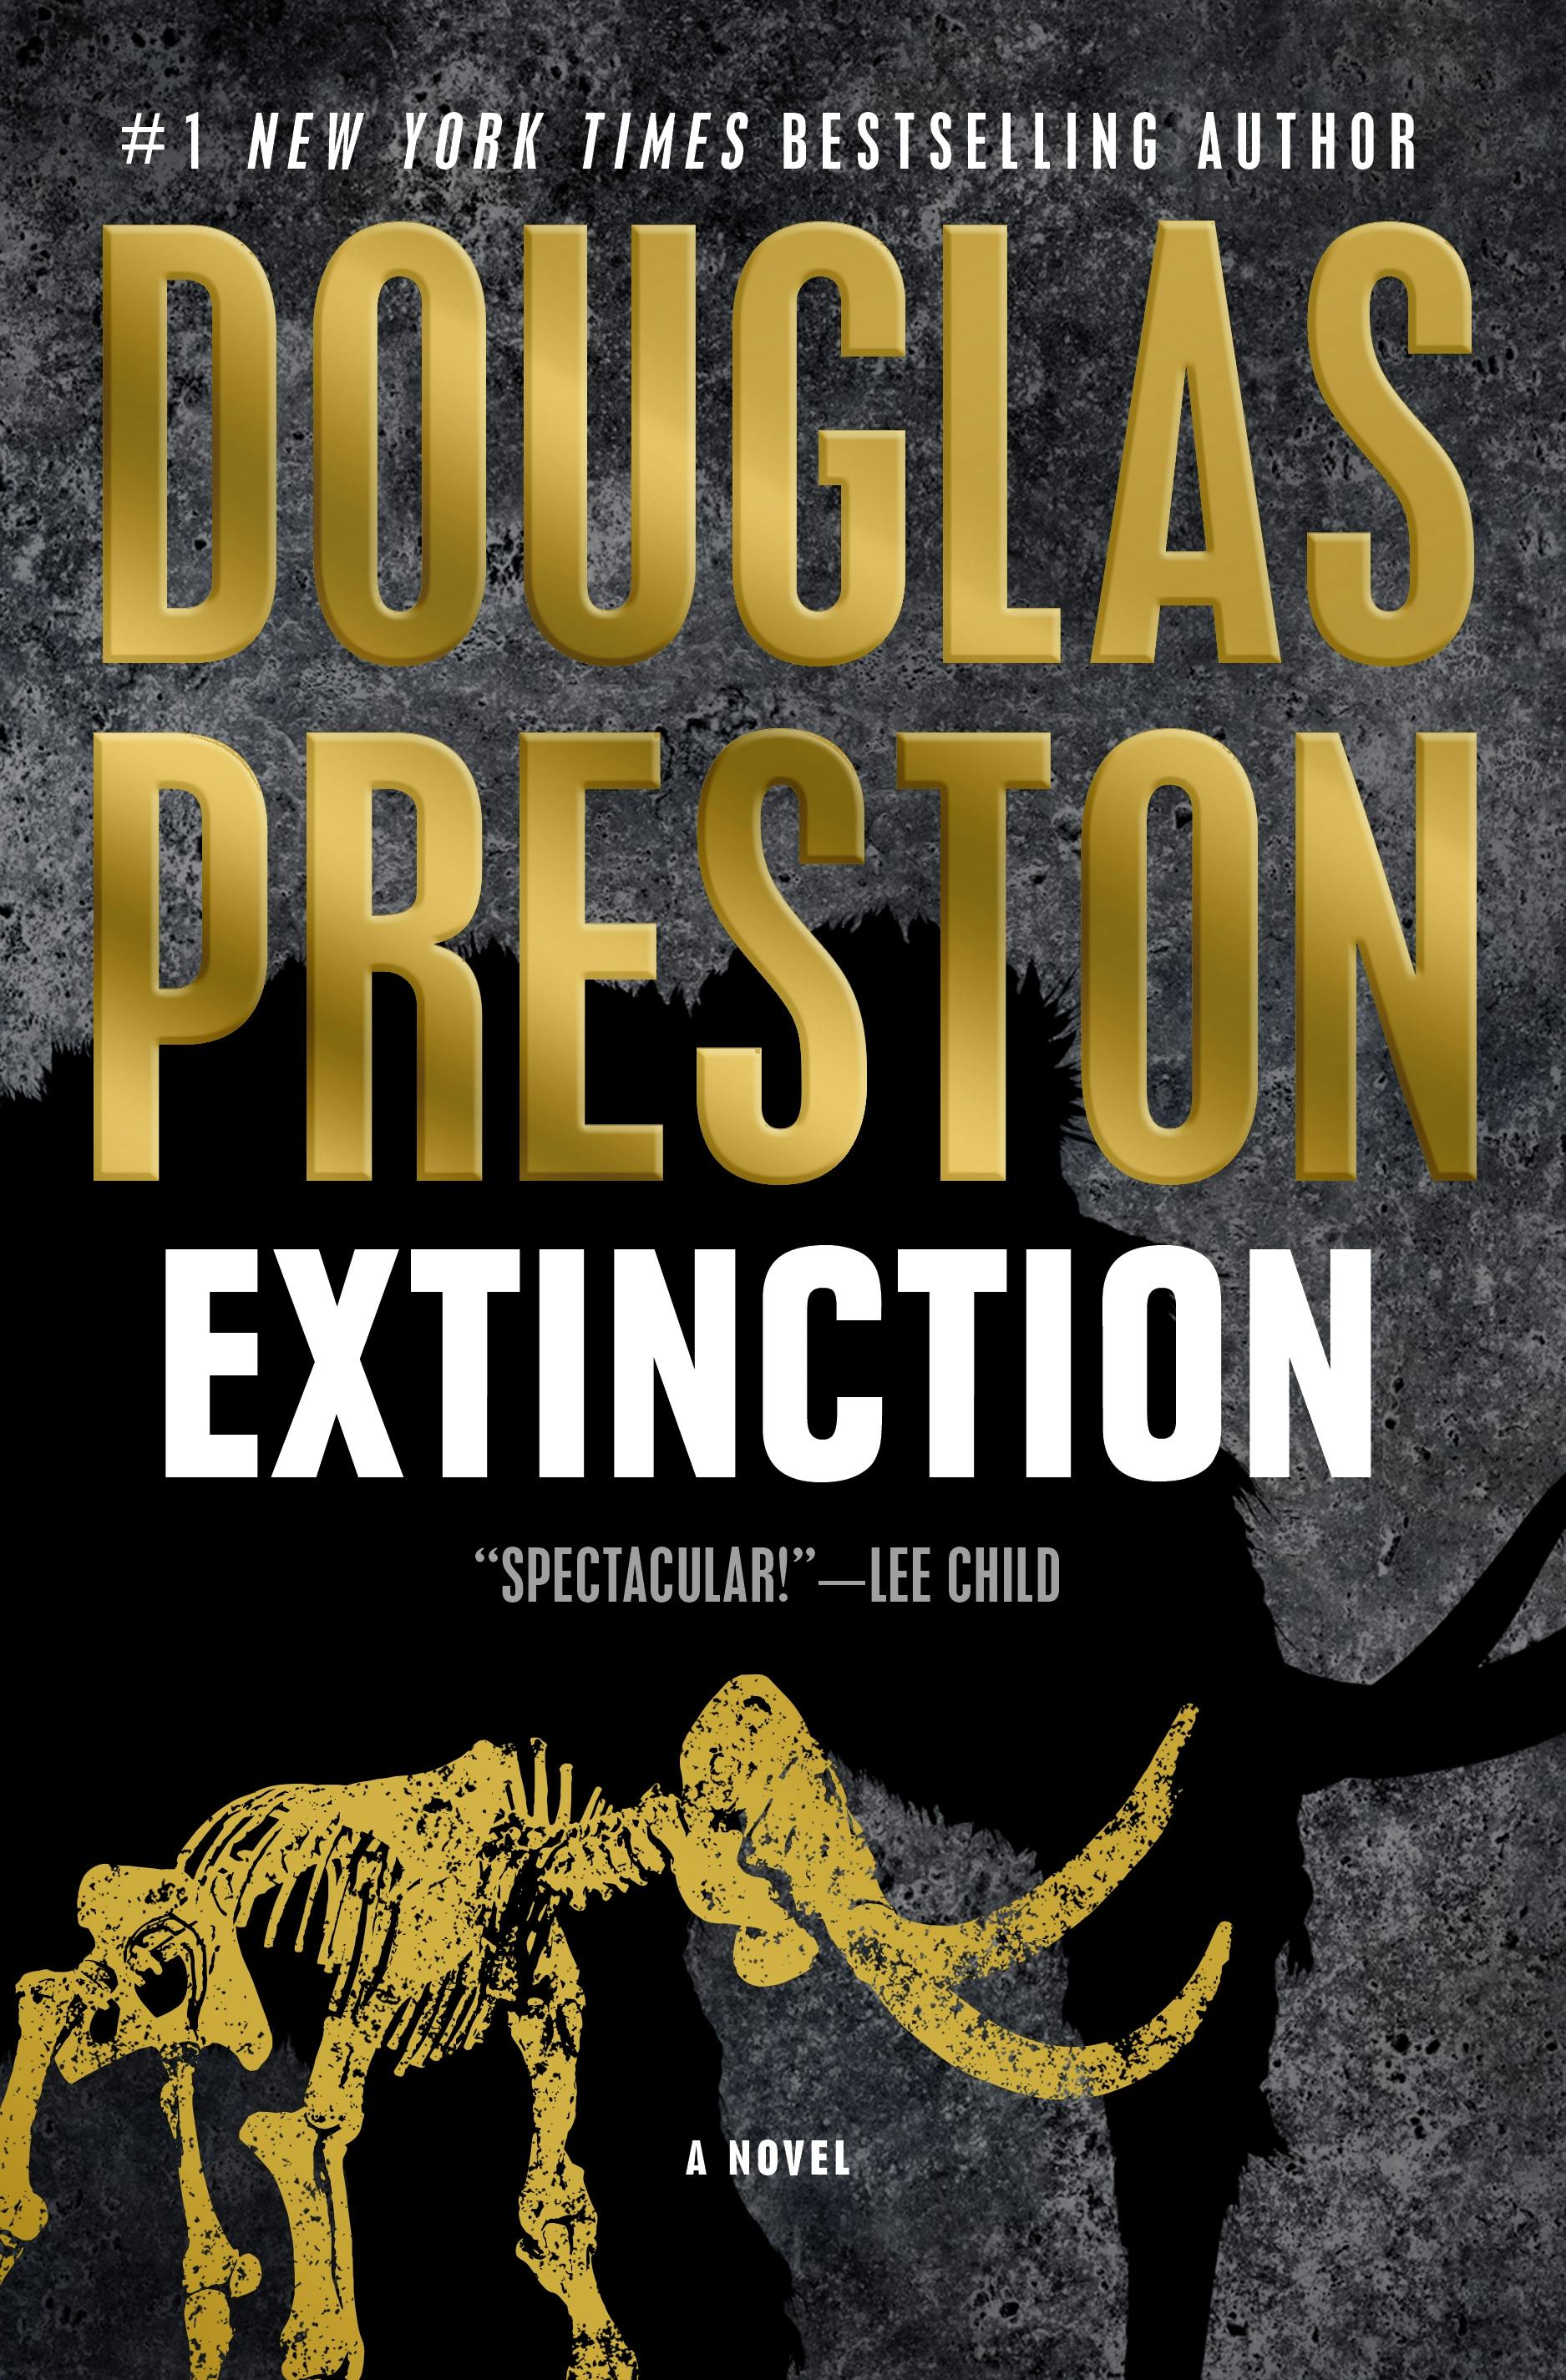 Cover for the book titled as: Extinction